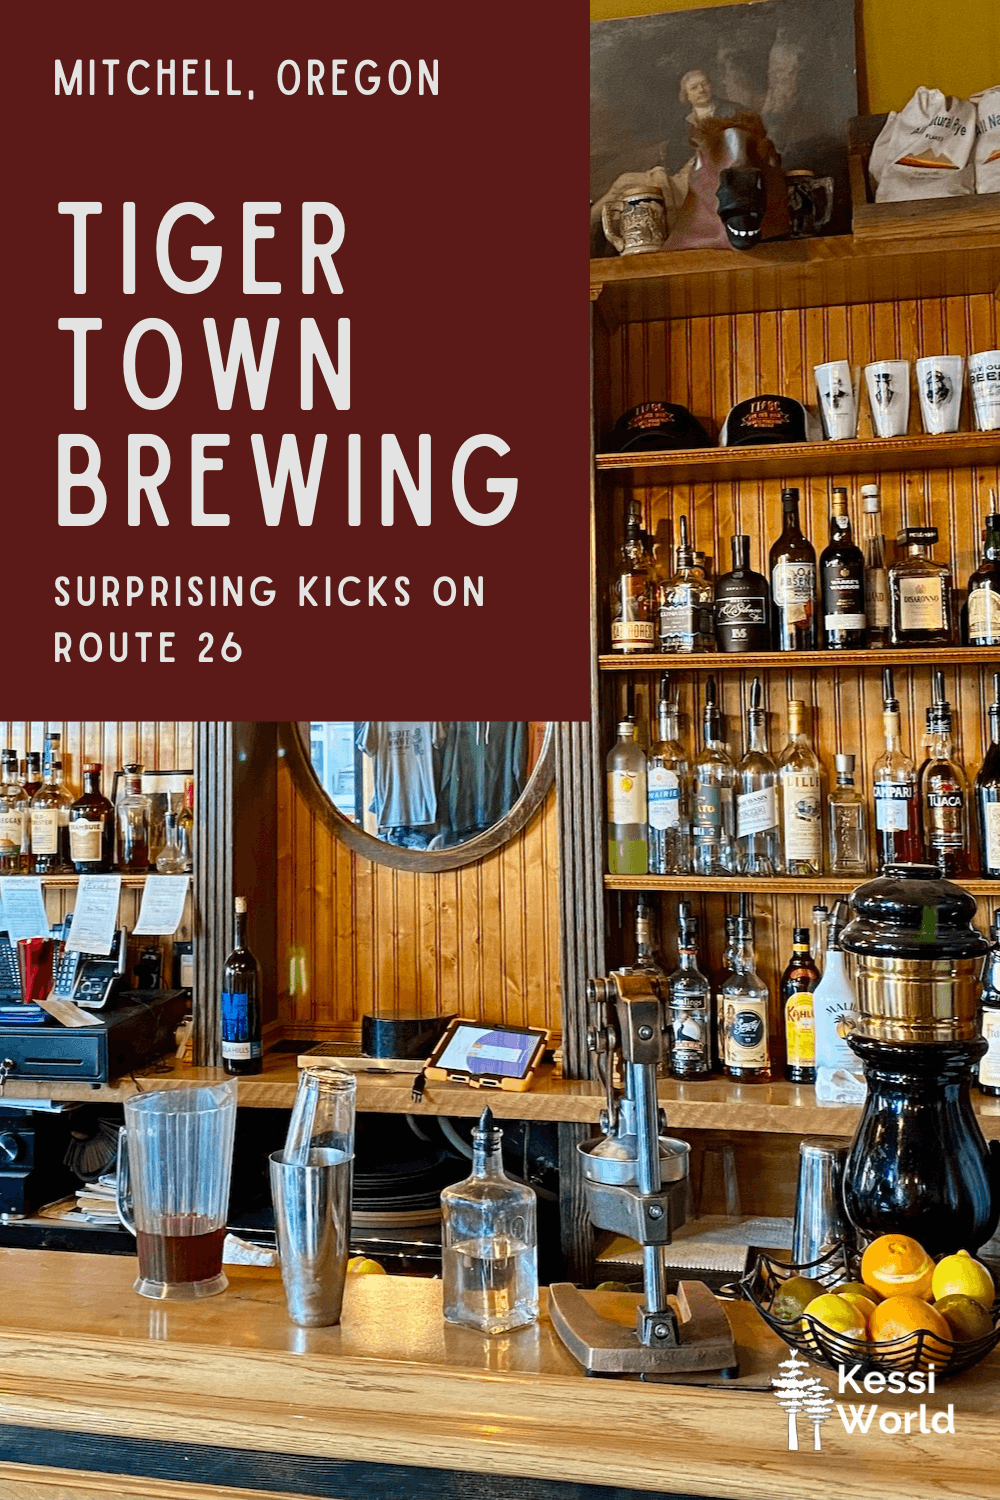 The fully stocked bar of Tiger Town Brewing, complete with a number of high end whiskey bottles and fresh citrus in a black wire basket on the counter.  